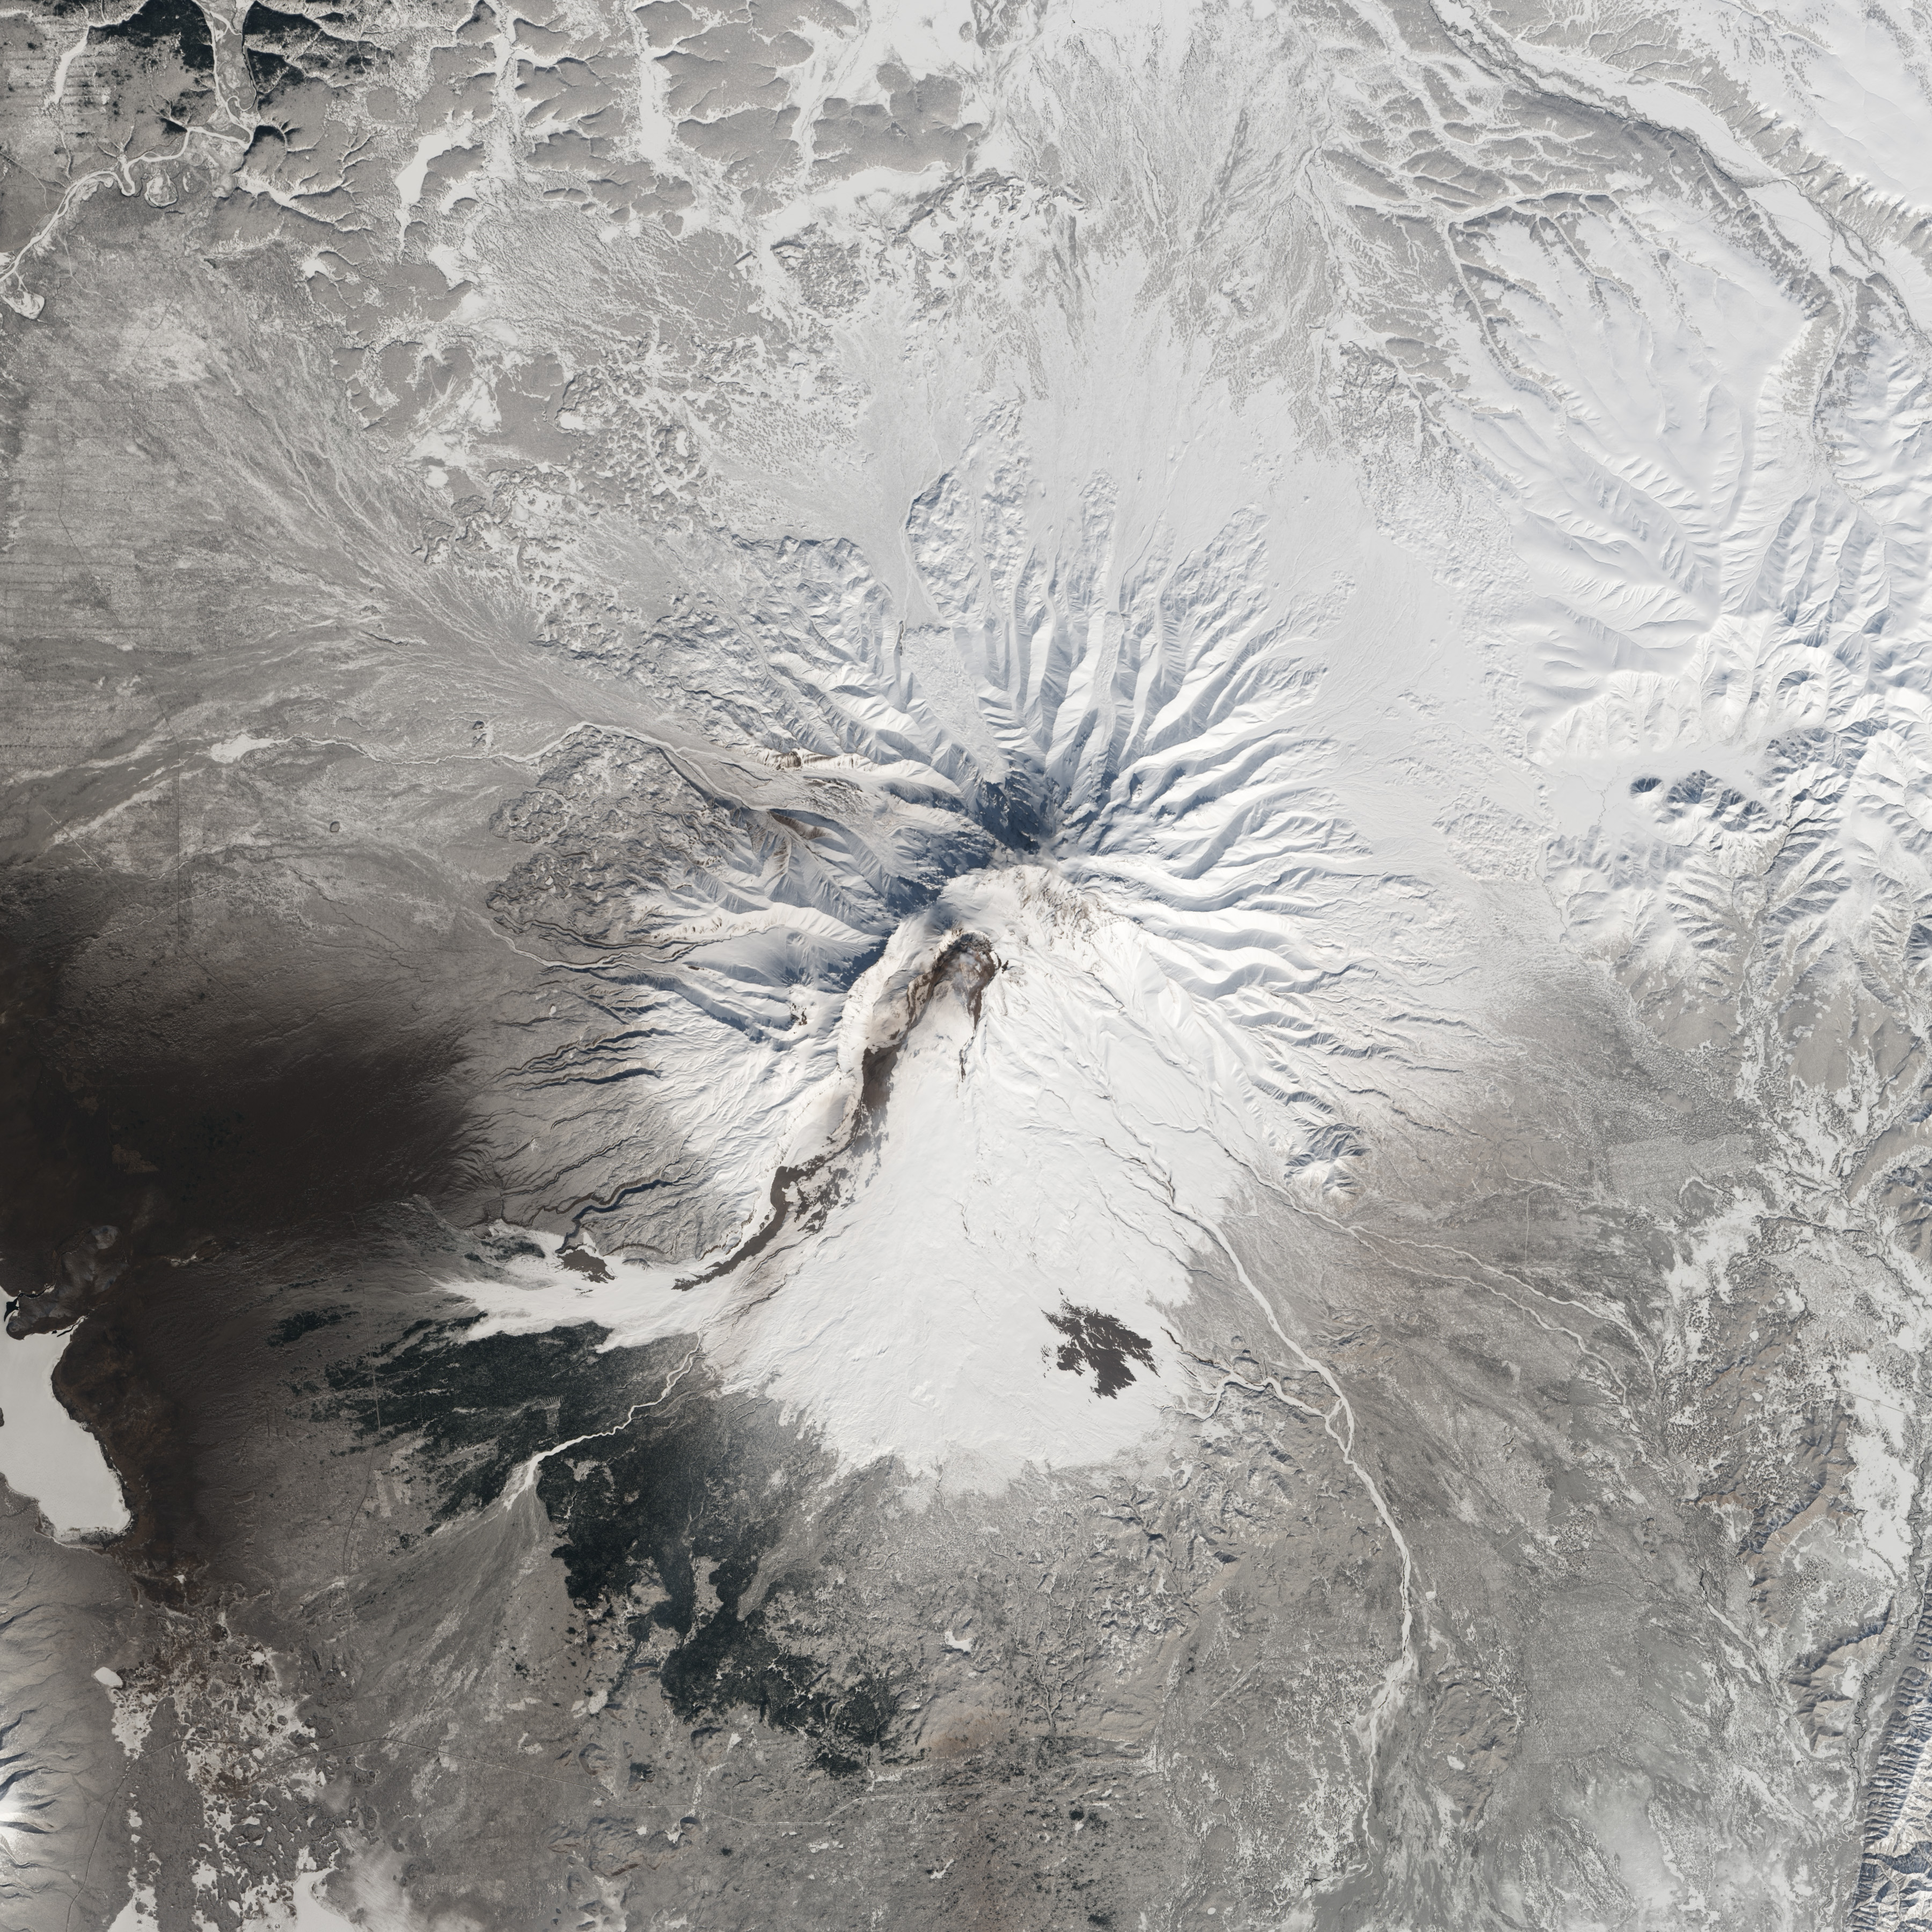 Five Volcanoes Erupting at Once - related image preview